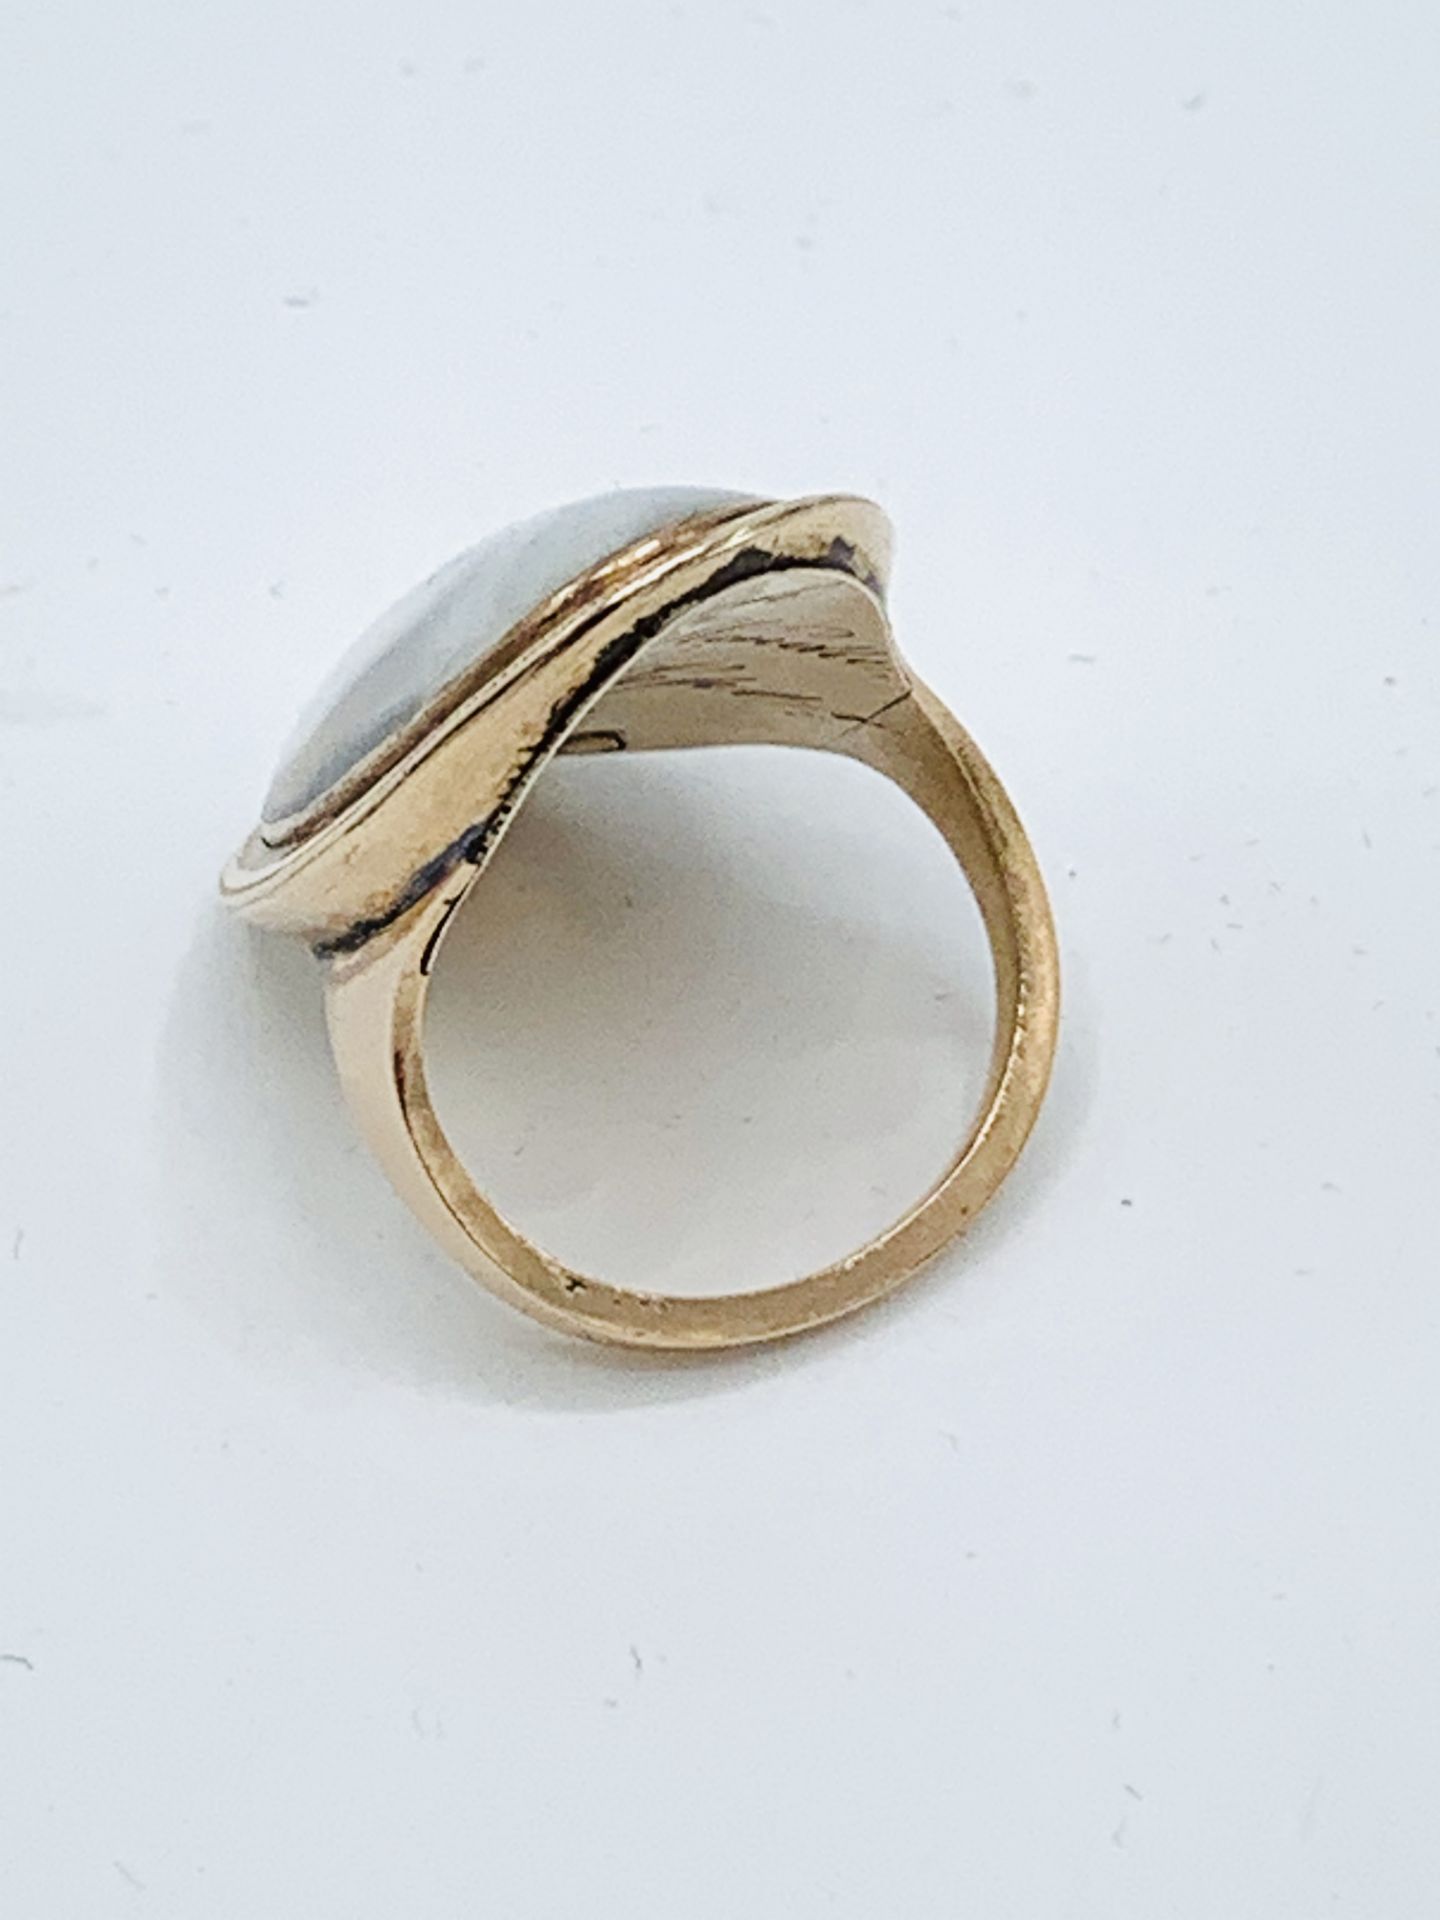 Georgian portrait ring dated 1792. Length 30mm, width 20mm. Size M. Wt. 6.5gms. Inscribed underside - Image 2 of 4